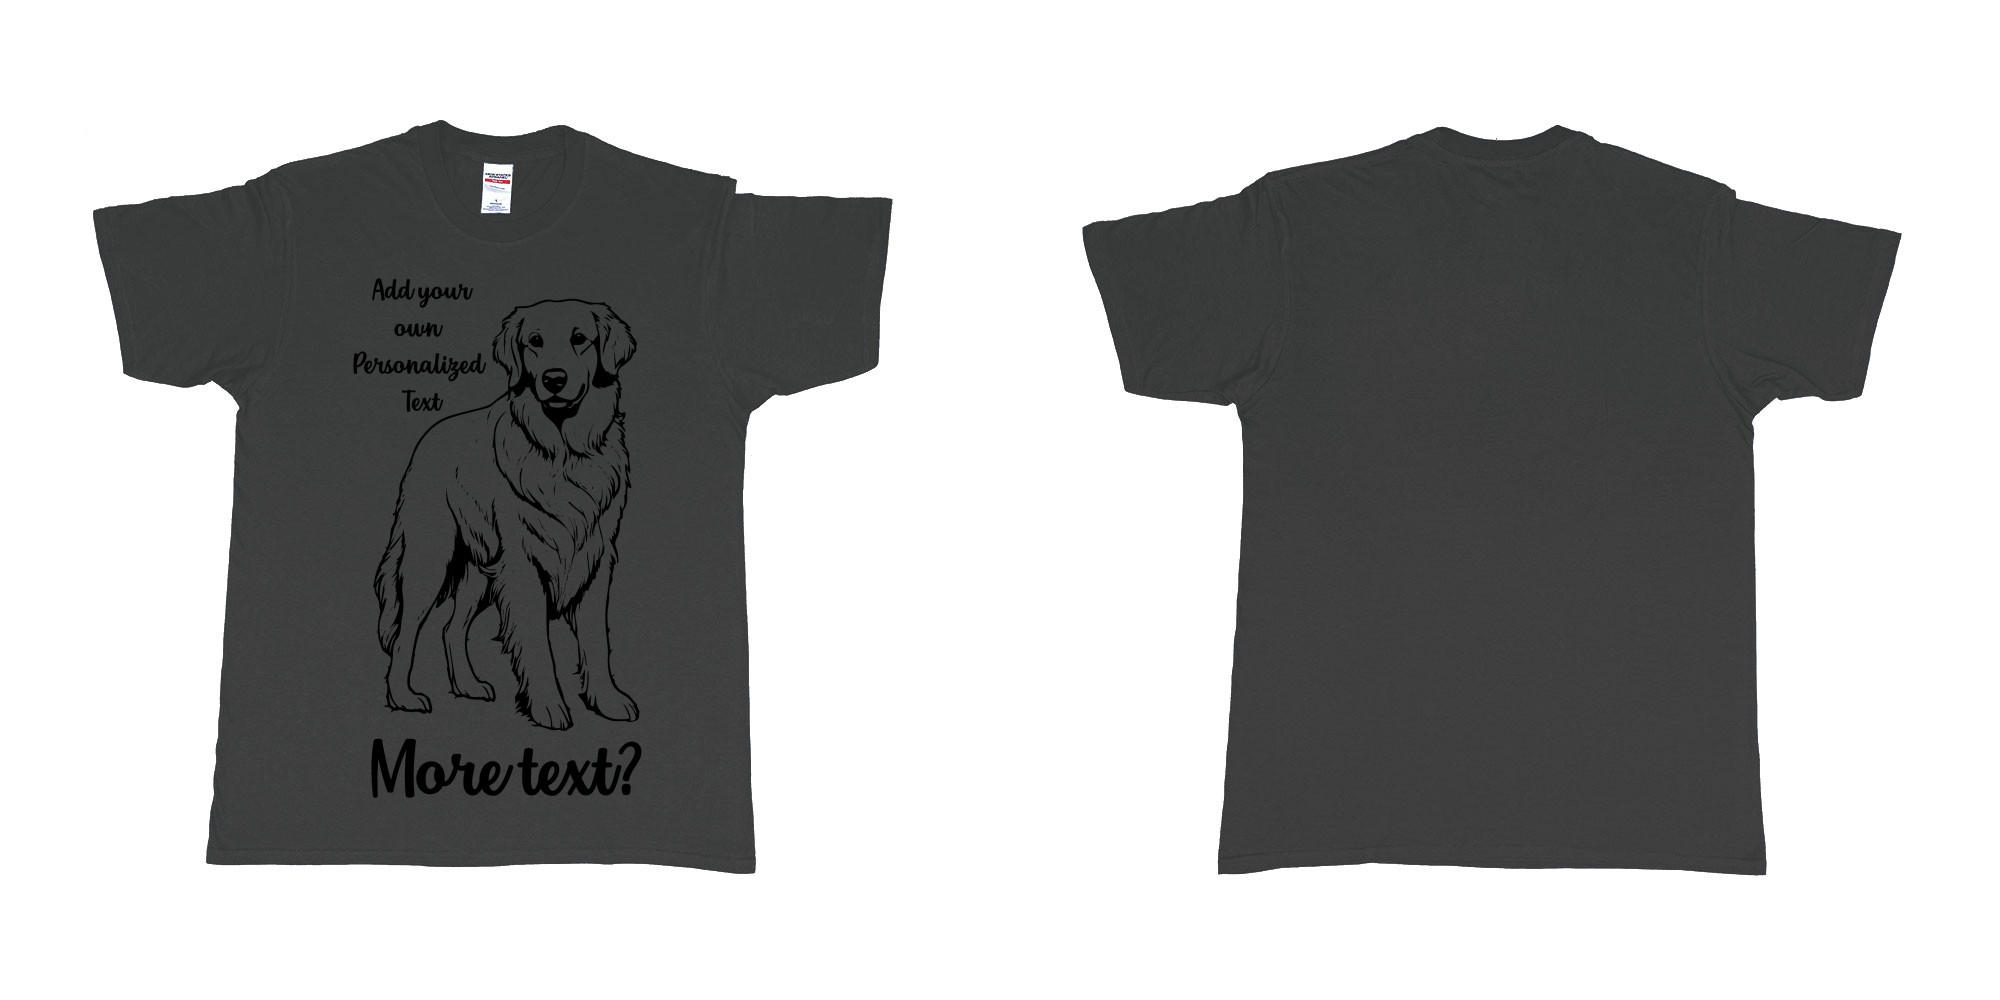 Custom tshirt design golden retriever dog breed personalized text in fabric color black choice your own text made in Bali by The Pirate Way